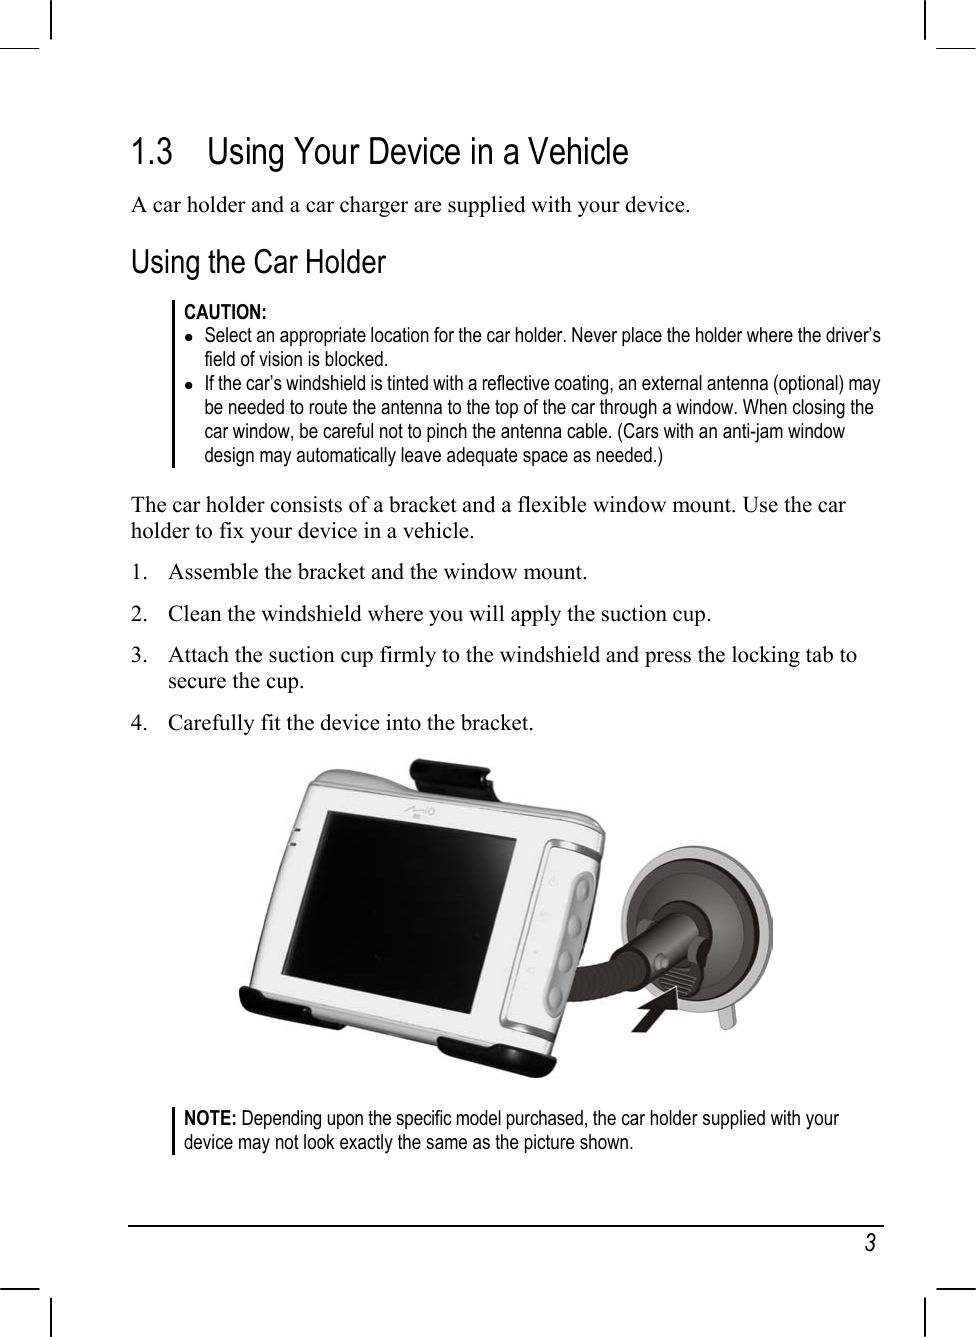   3 1.3  Using Your Device in a Vehicle A car holder and a car charger are supplied with your device. Using the Car Holder CAUTION:  Select an appropriate location for the car holder. Never place the holder where the driver’s field of vision is blocked.  If the car’s windshield is tinted with a reflective coating, an external antenna (optional) may be needed to route the antenna to the top of the car through a window. When closing the car window, be careful not to pinch the antenna cable. (Cars with an anti-jam window design may automatically leave adequate space as needed.)  The car holder consists of a bracket and a flexible window mount. Use the car holder to fix your device in a vehicle. 1.  Assemble the bracket and the window mount. 2.  Clean the windshield where you will apply the suction cup. 3.  Attach the suction cup firmly to the windshield and press the locking tab to secure the cup. 4.  Carefully fit the device into the bracket.  NOTE: Depending upon the specific model purchased, the car holder supplied with your device may not look exactly the same as the picture shown. 